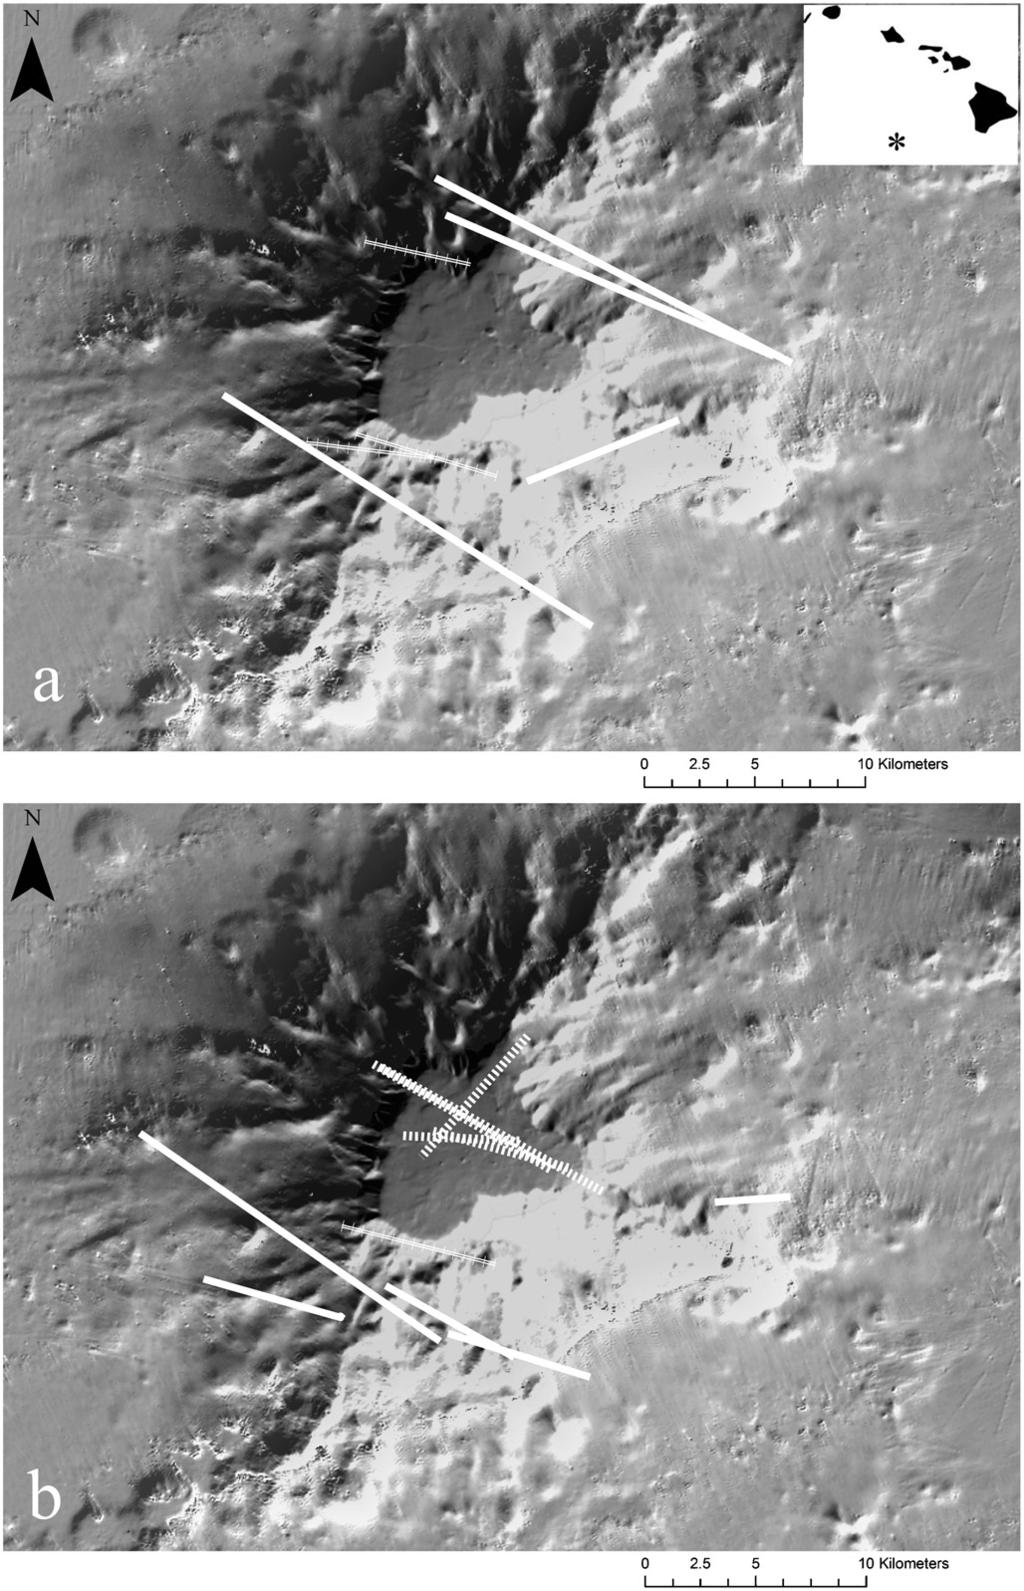 L. De Forest, J. Drazen / Deep-Sea Research I 56 (2009) 232 250 235 Fig. 1. Locations of the 18 trawls conducted over and around Cross Seamount: (a) day-deep trawls and (b) night-shallow trawls.